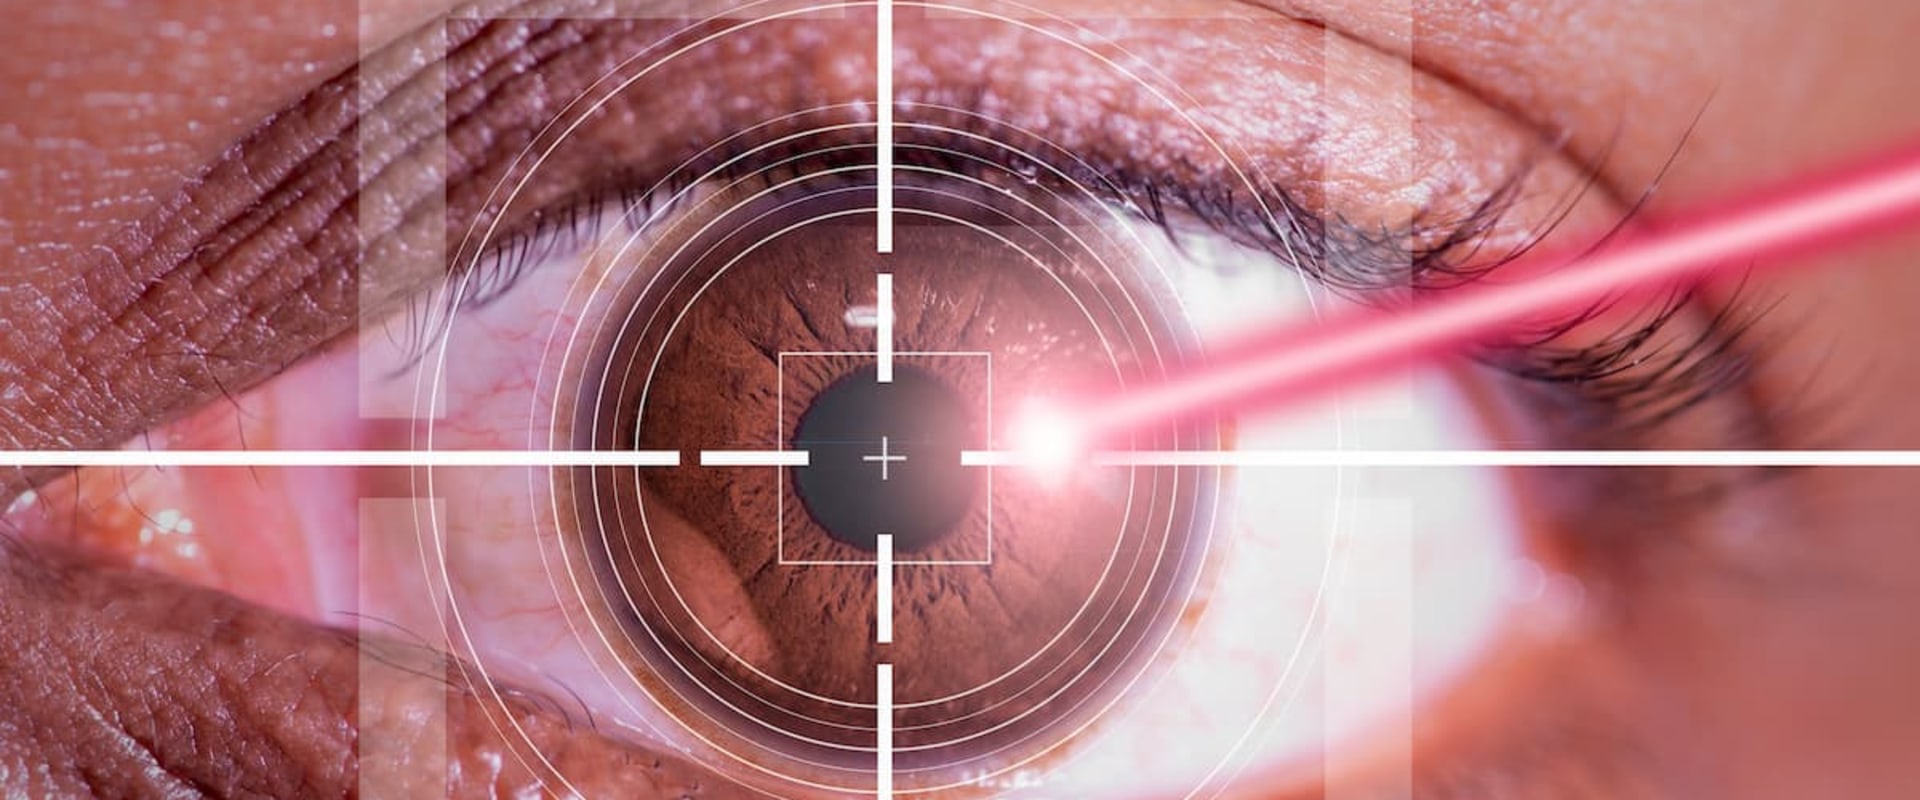 Is Lasik Surgery High Risk? An Expert's Perspective